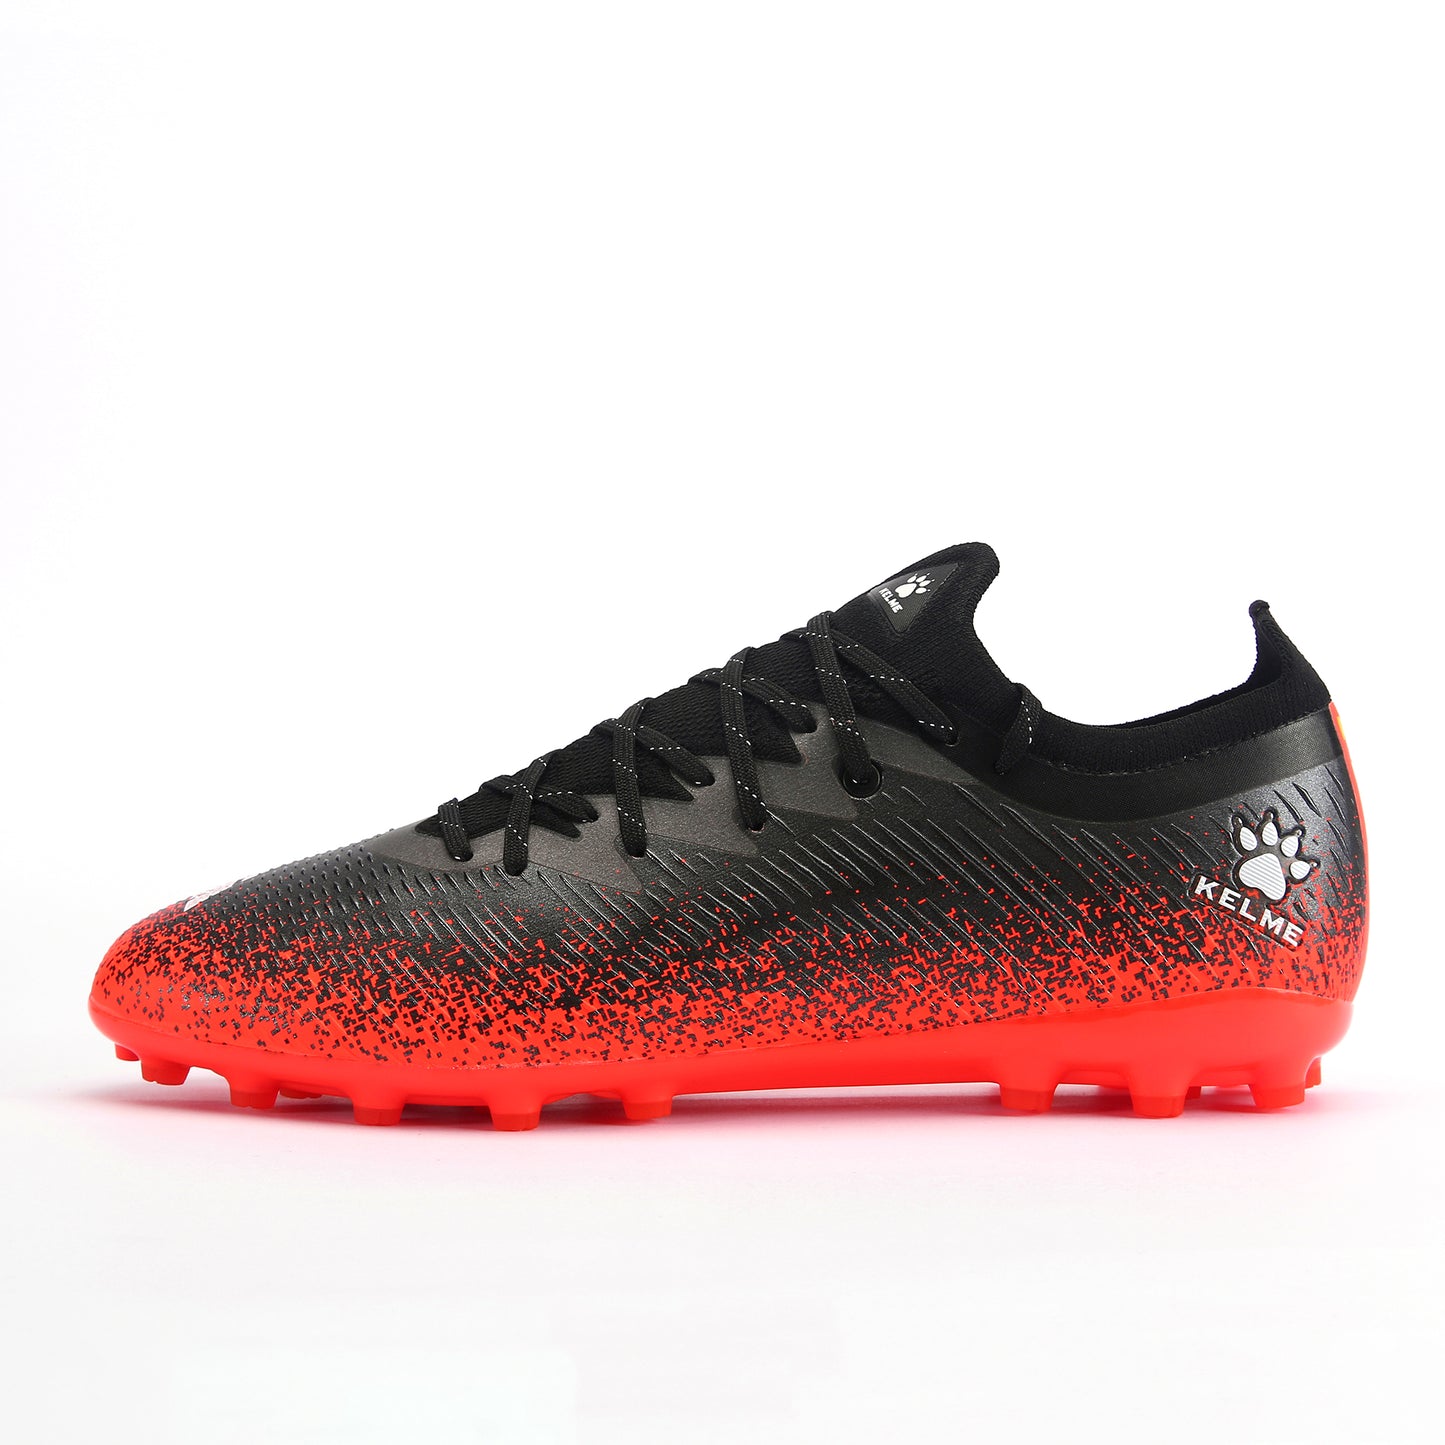 Lava Football Boots- Red